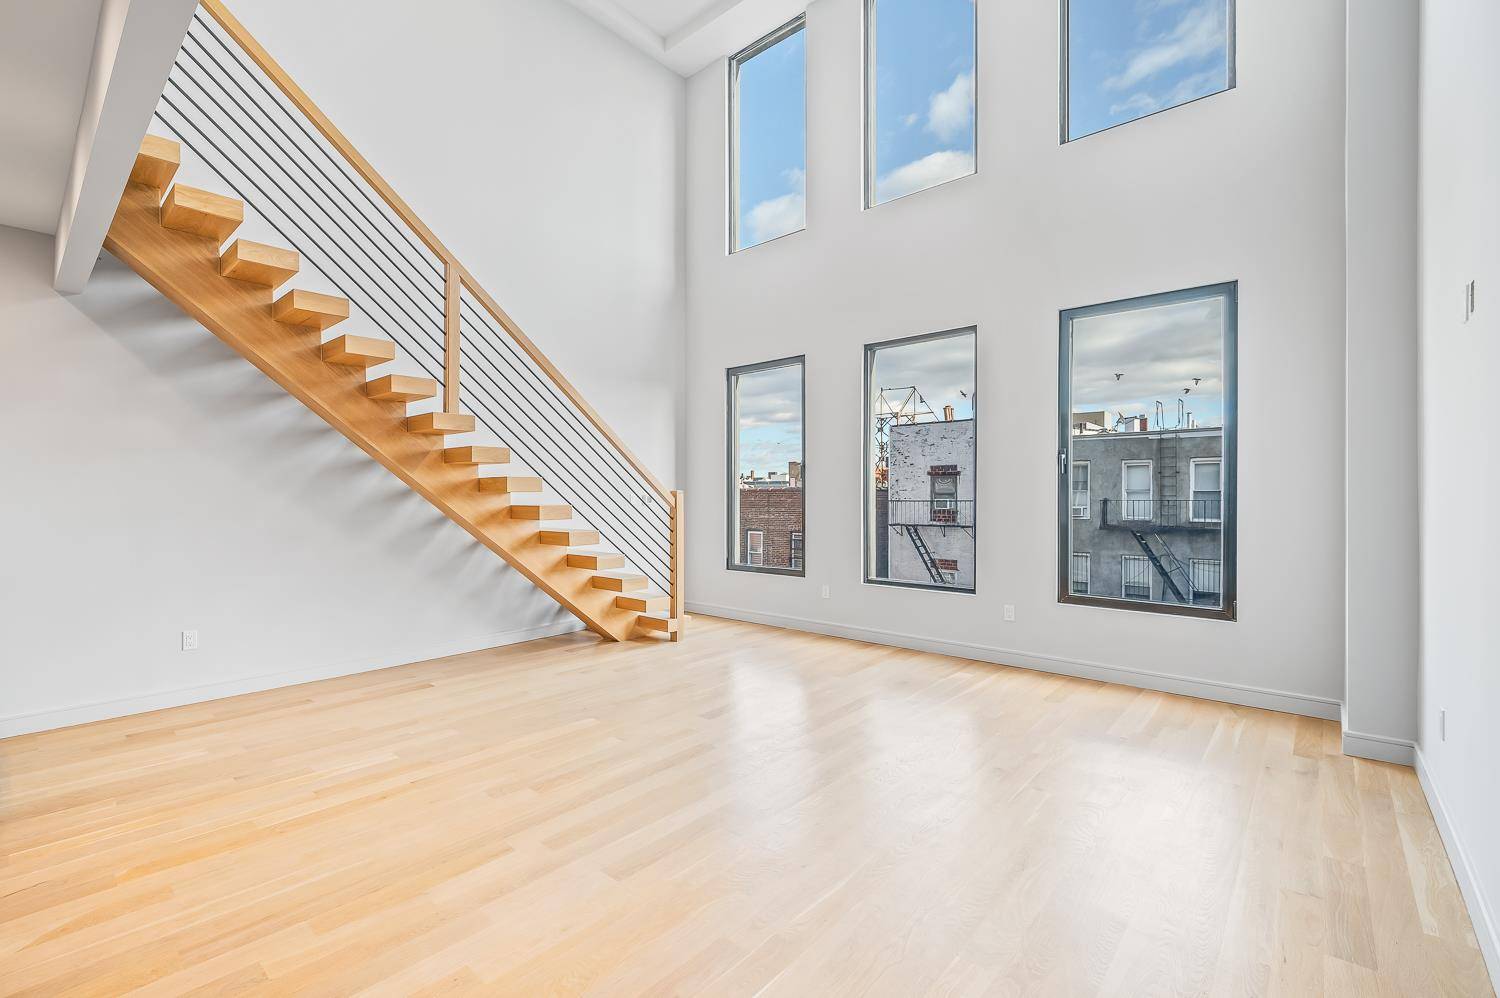 We are pleased to announce the release of 30 61 38th Street in the heart of Astoria.